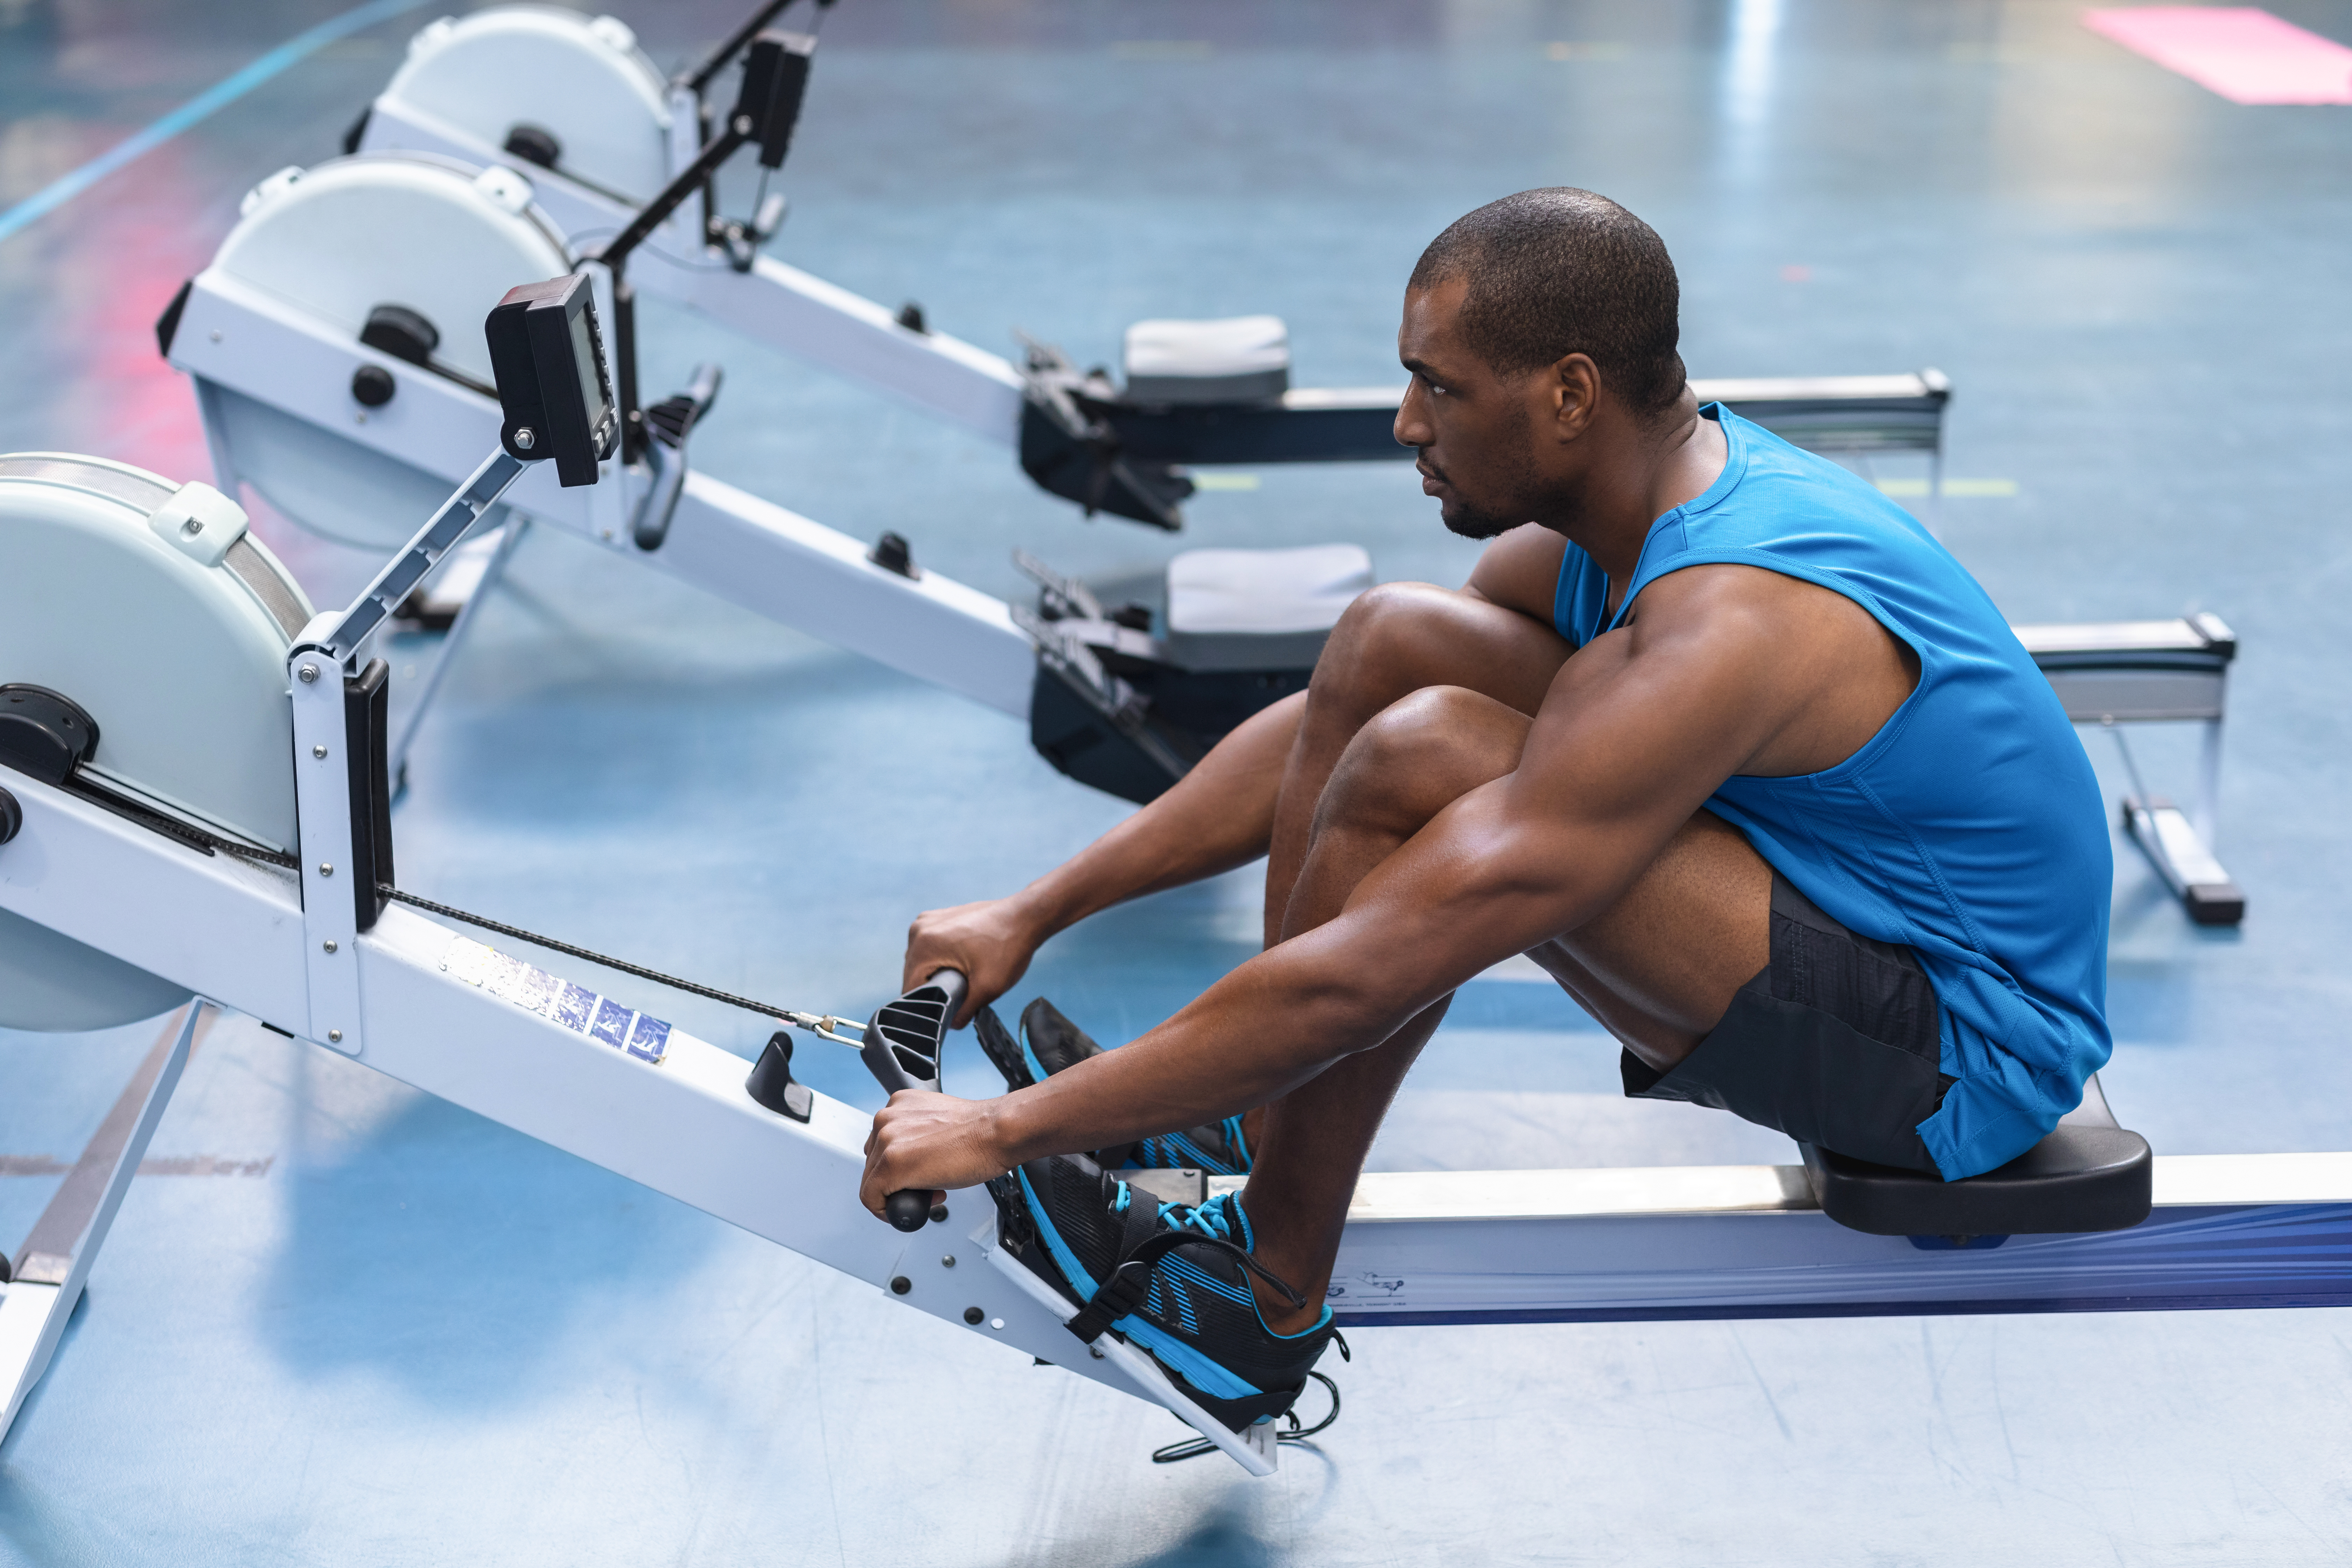 Man rowing on a rowing machine